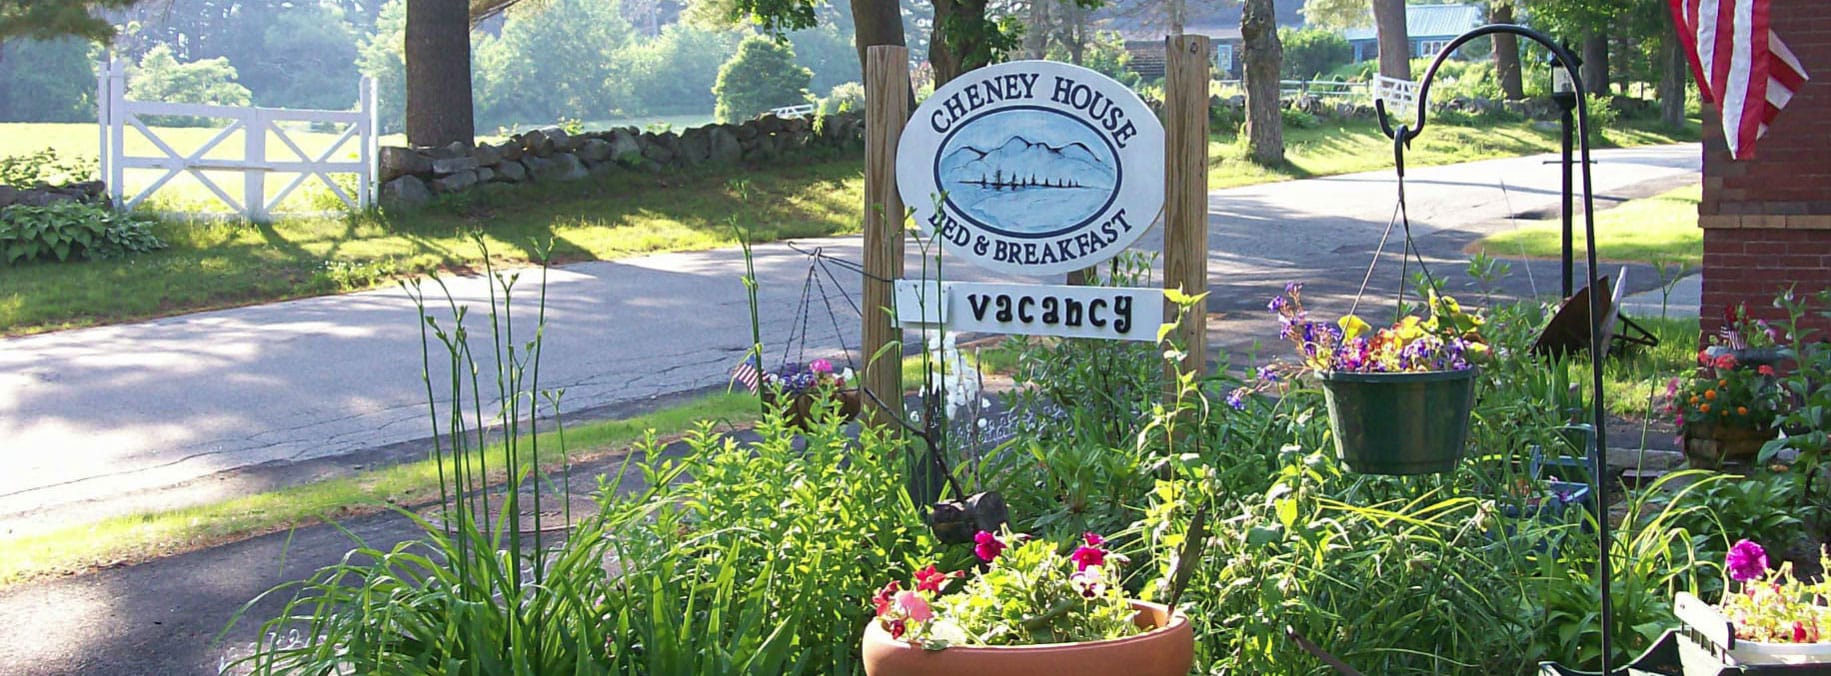 Cheney-House-B-B-New-Hampshire-Bed-and-Breakfast-Association